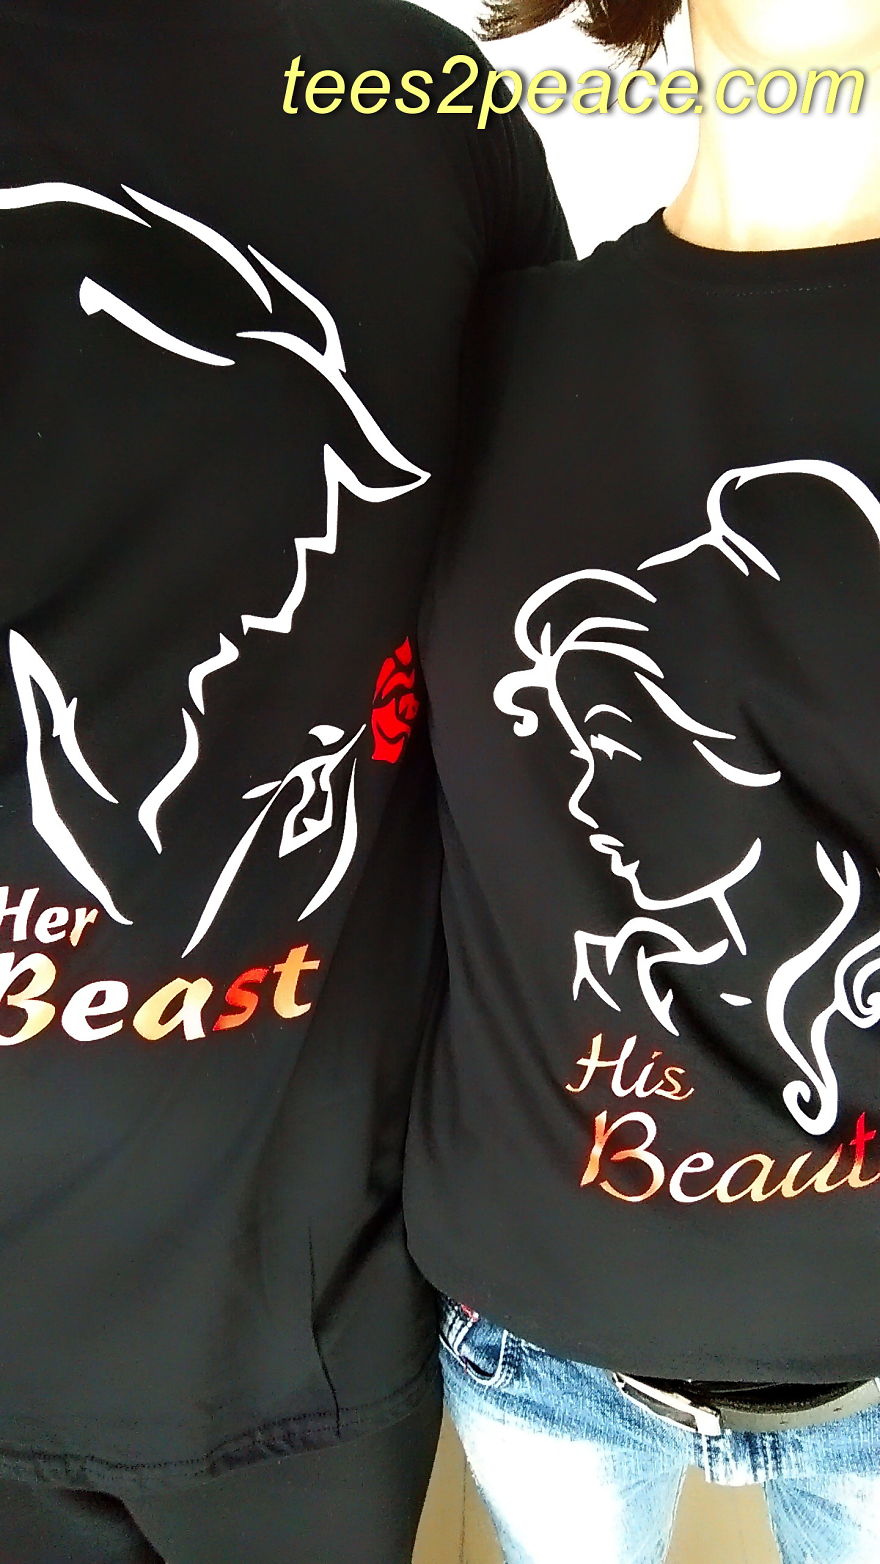 My Favourite Beauty And The Beast Love Story Expectations And Something Else...